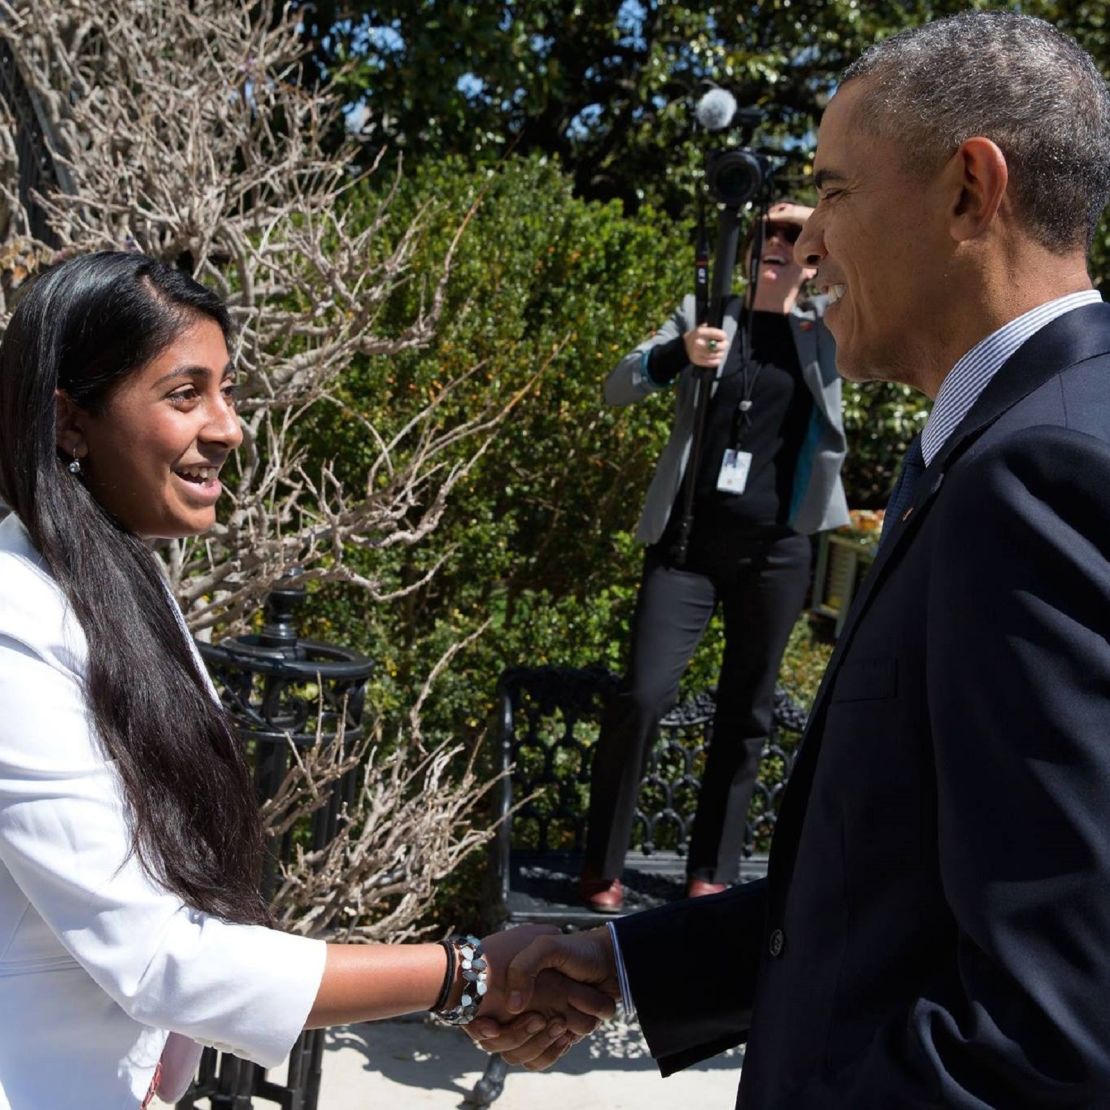 Kurup met with Barack Obama to discuss her work in 2012 and again in 2016, pictured.